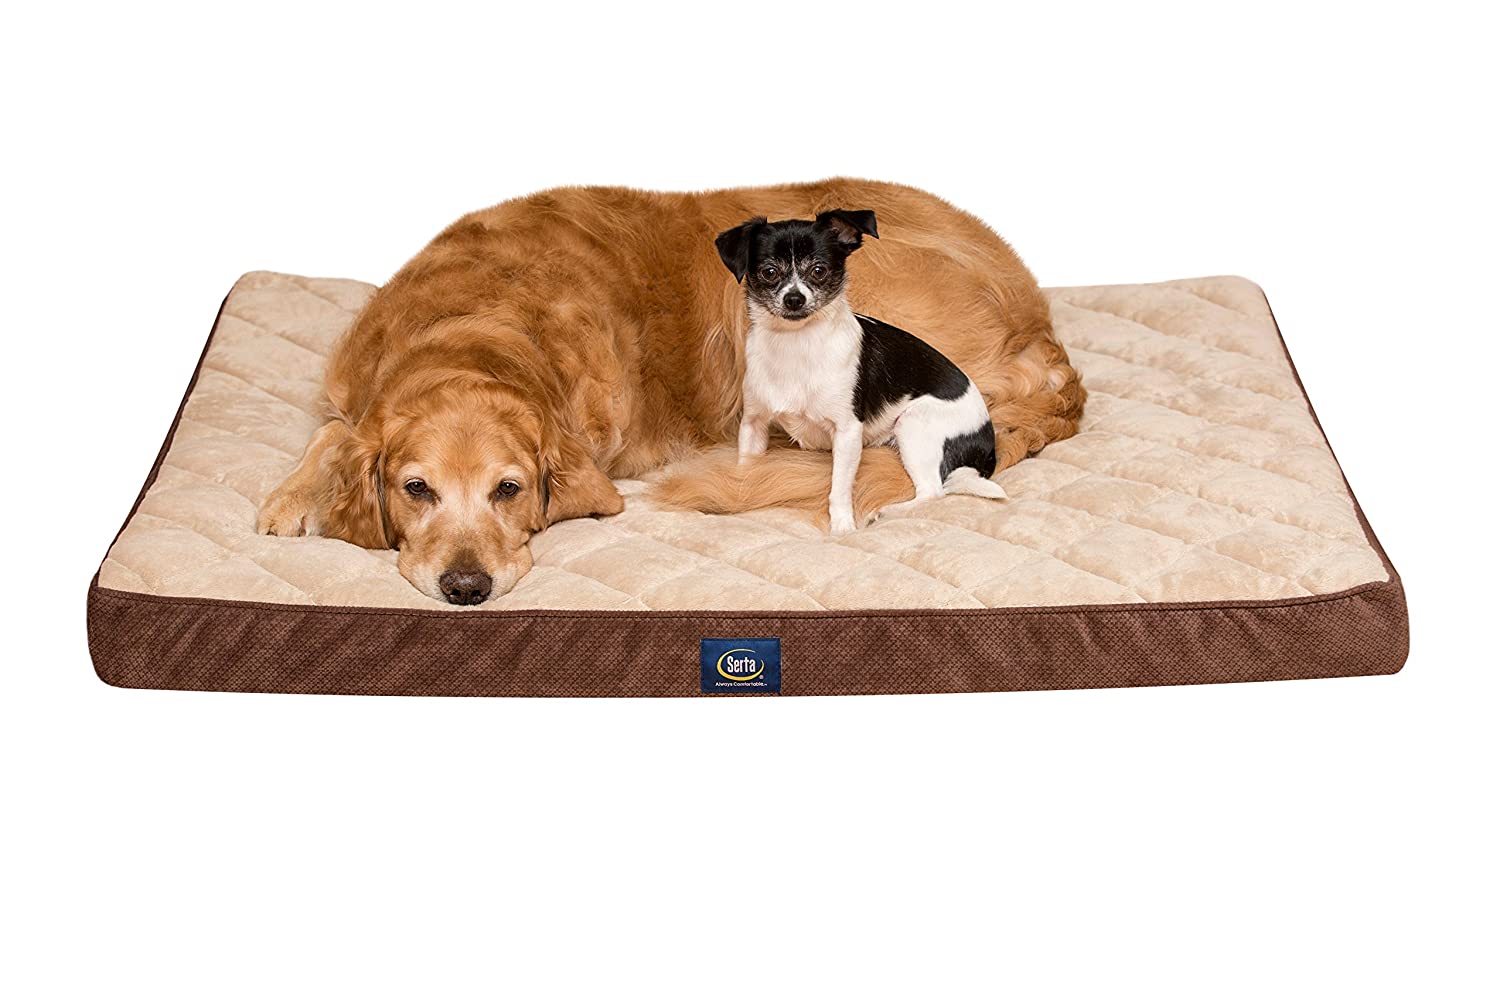 Serta Ortho Quilted Pillowtop Pet Bed